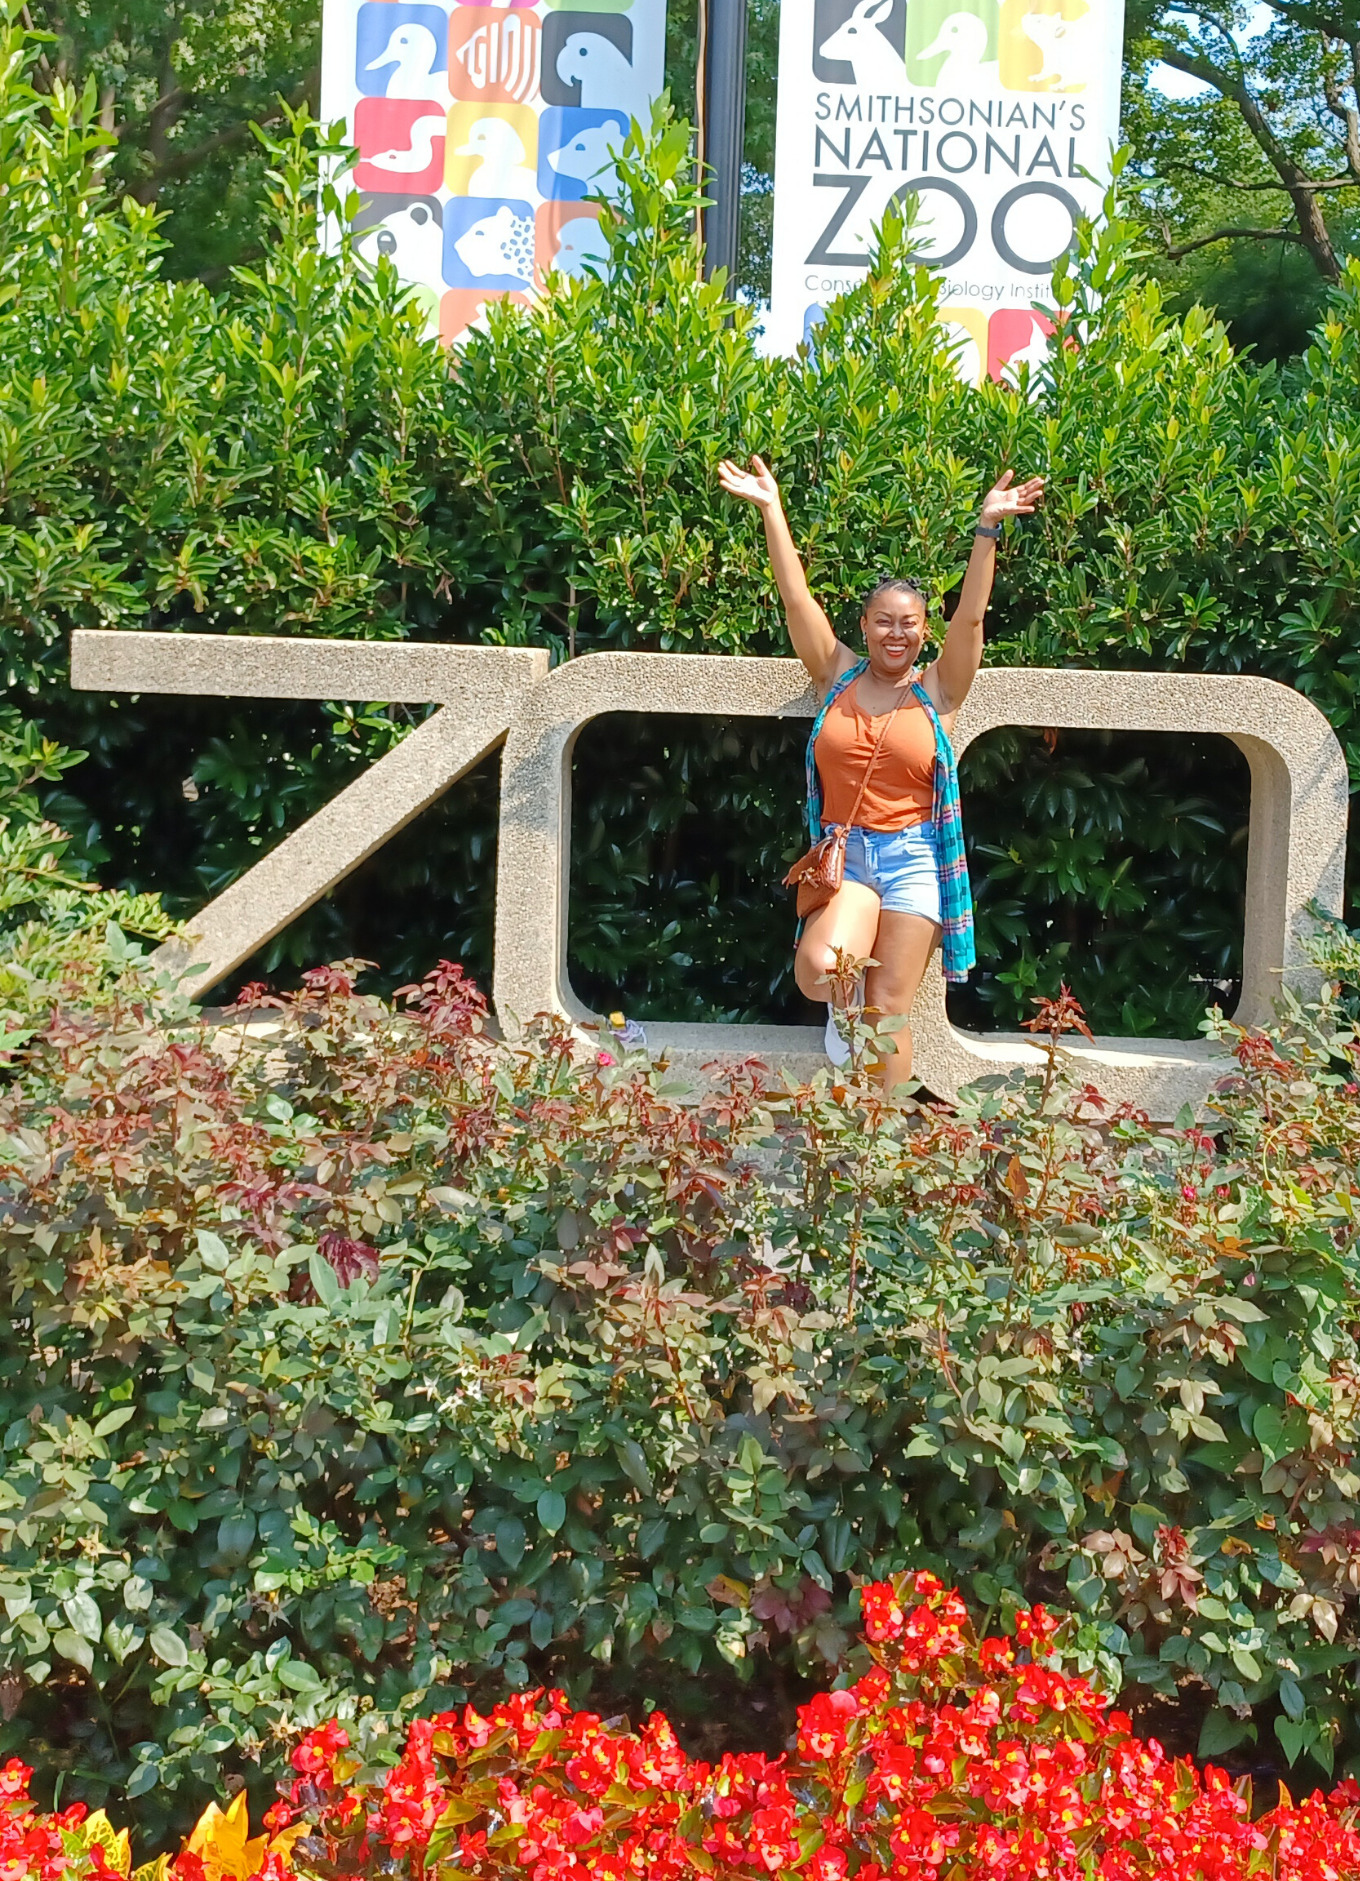 This Bahamian Gyal blogger, Rogan Smith smiles in front of the Smithsonian National Zoo in Washington DC